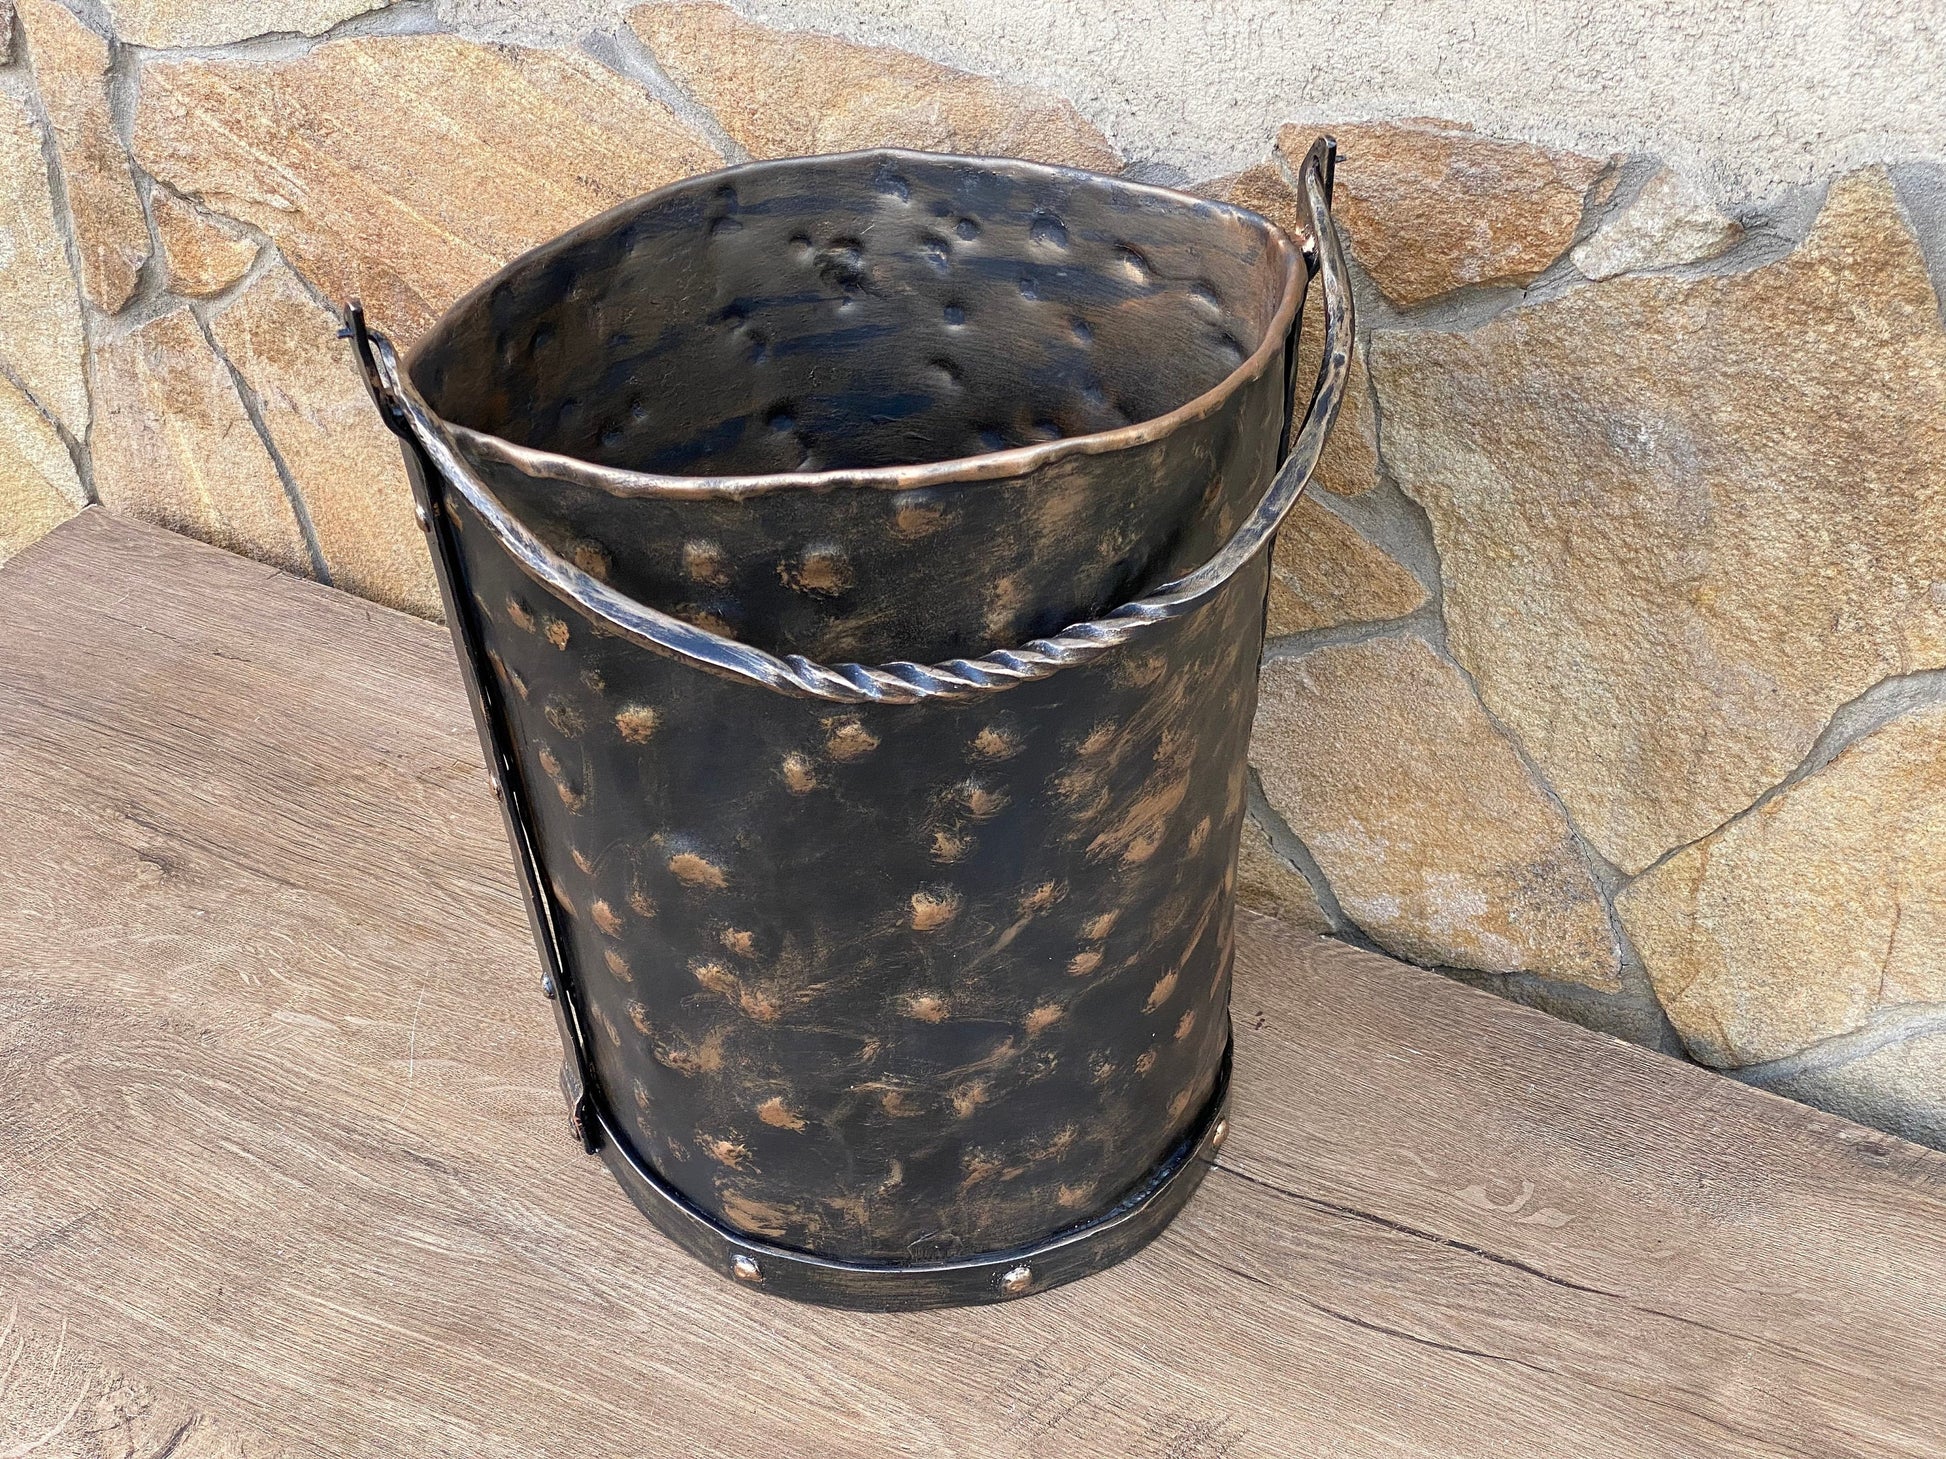 Bucket, ash bucket, firewood holder, birthday, Christmas, fireplace, medieval, iron gift, steel gift, anniversary, BBQ, fire poker,dads gift